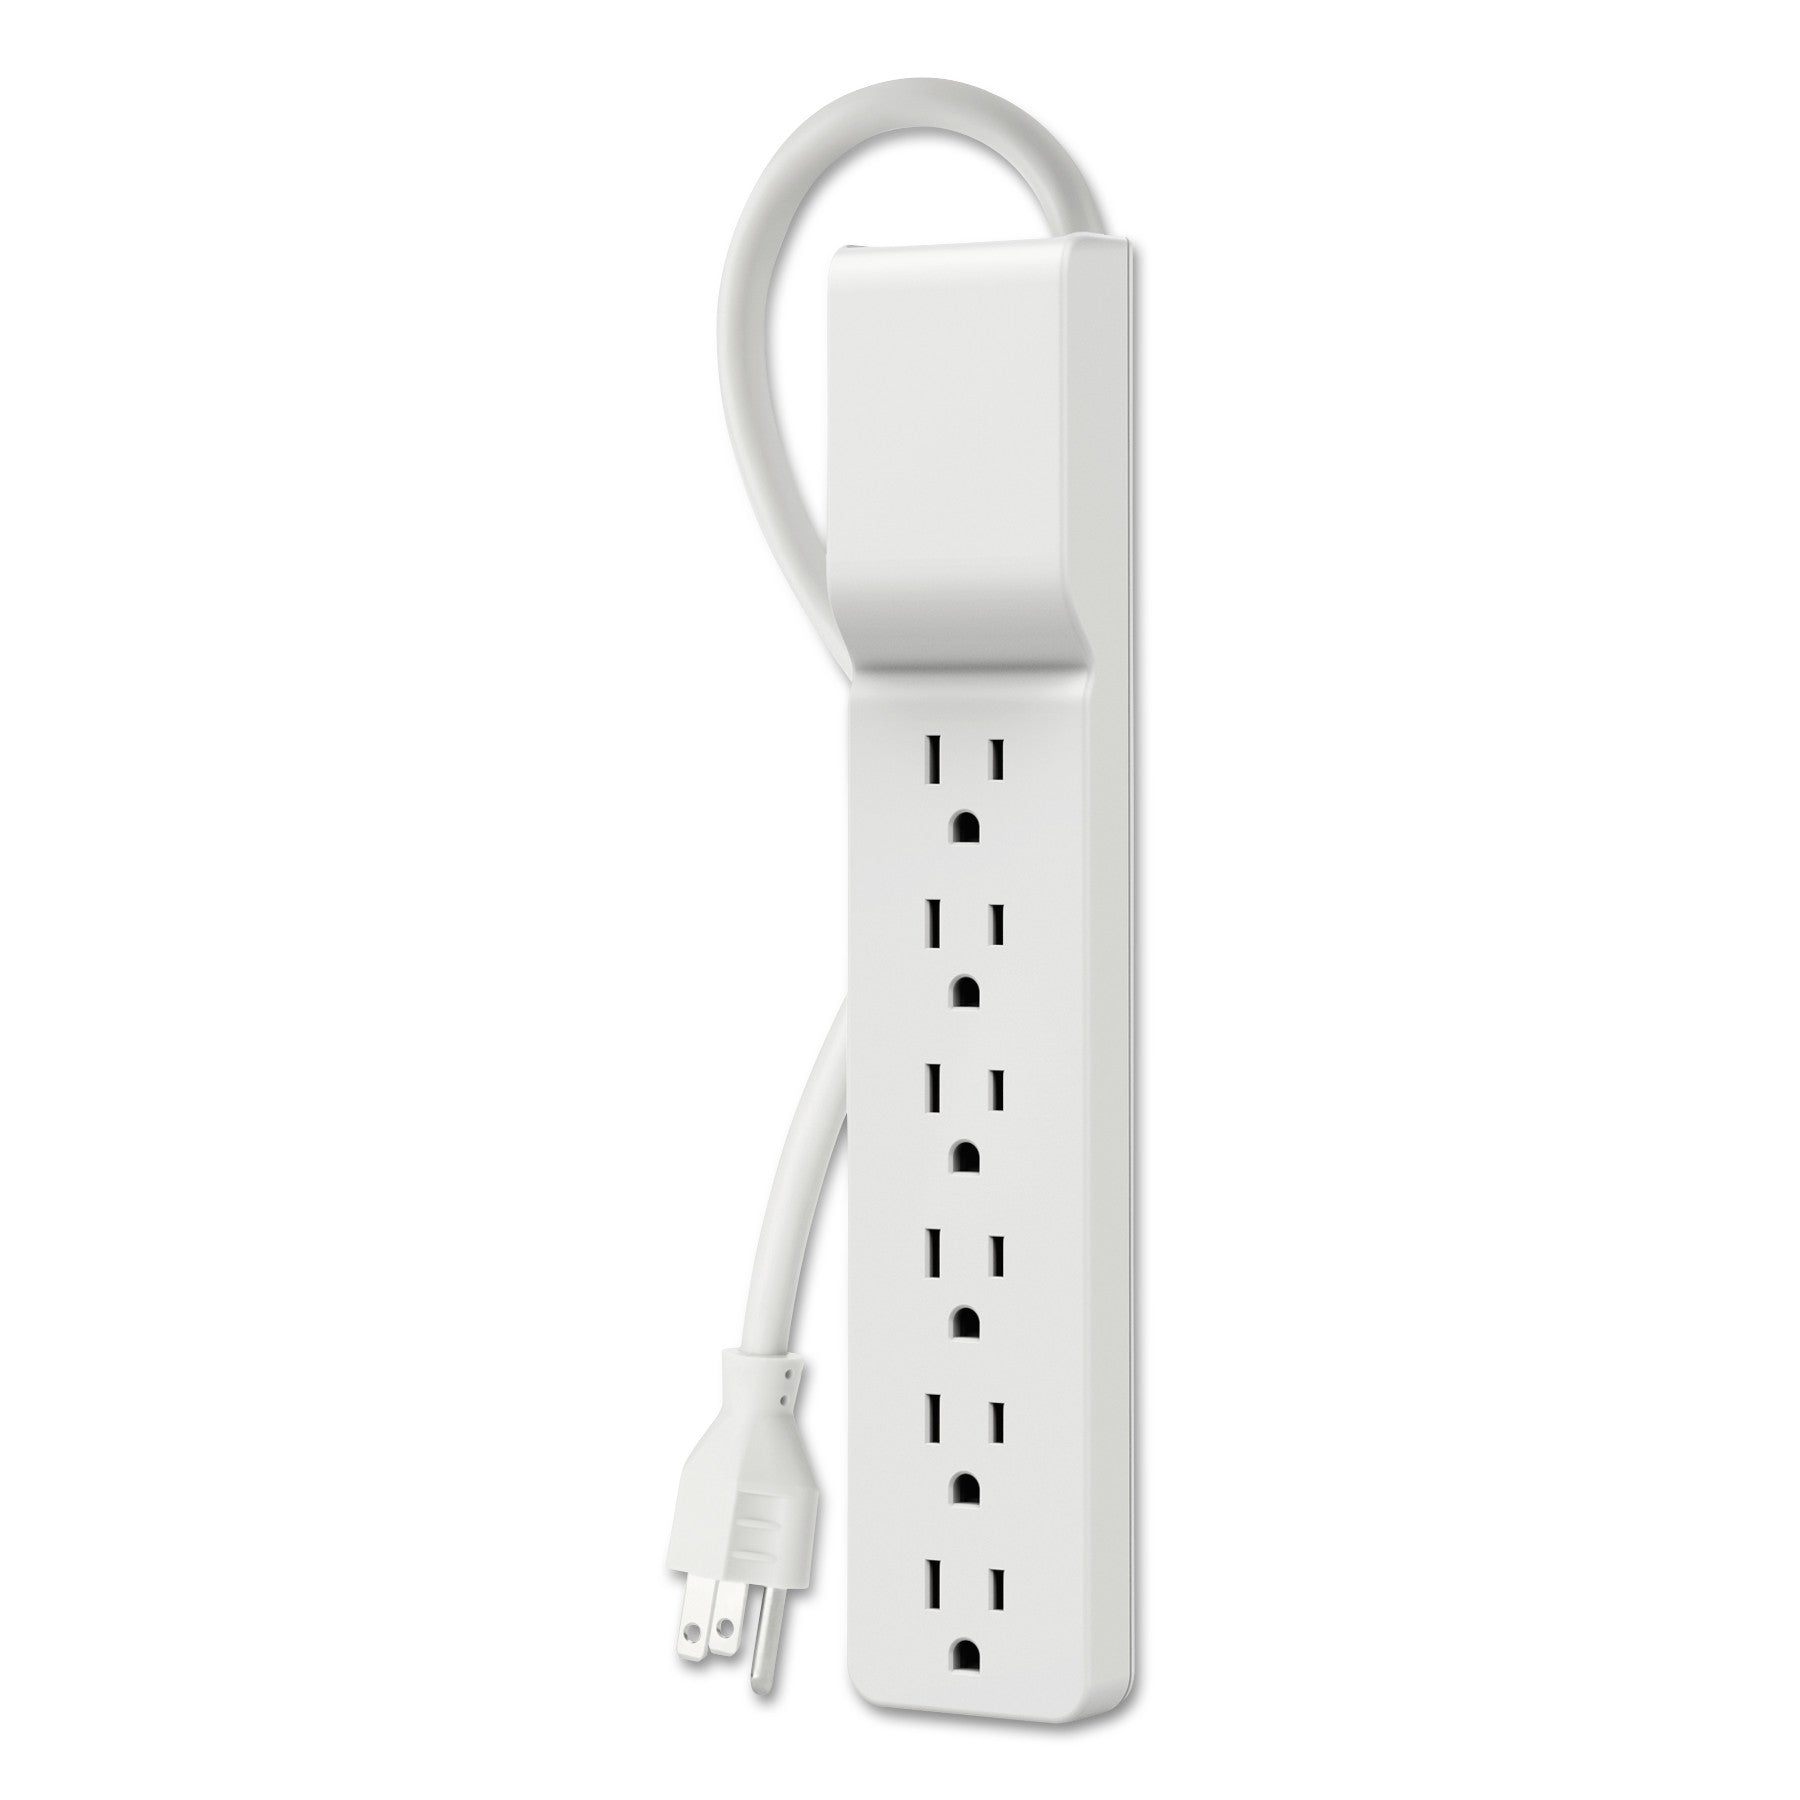 home-office-surge-protector-6-ac-outlets-10-ft-cord-720-j-white_blkbe10600010 - 1